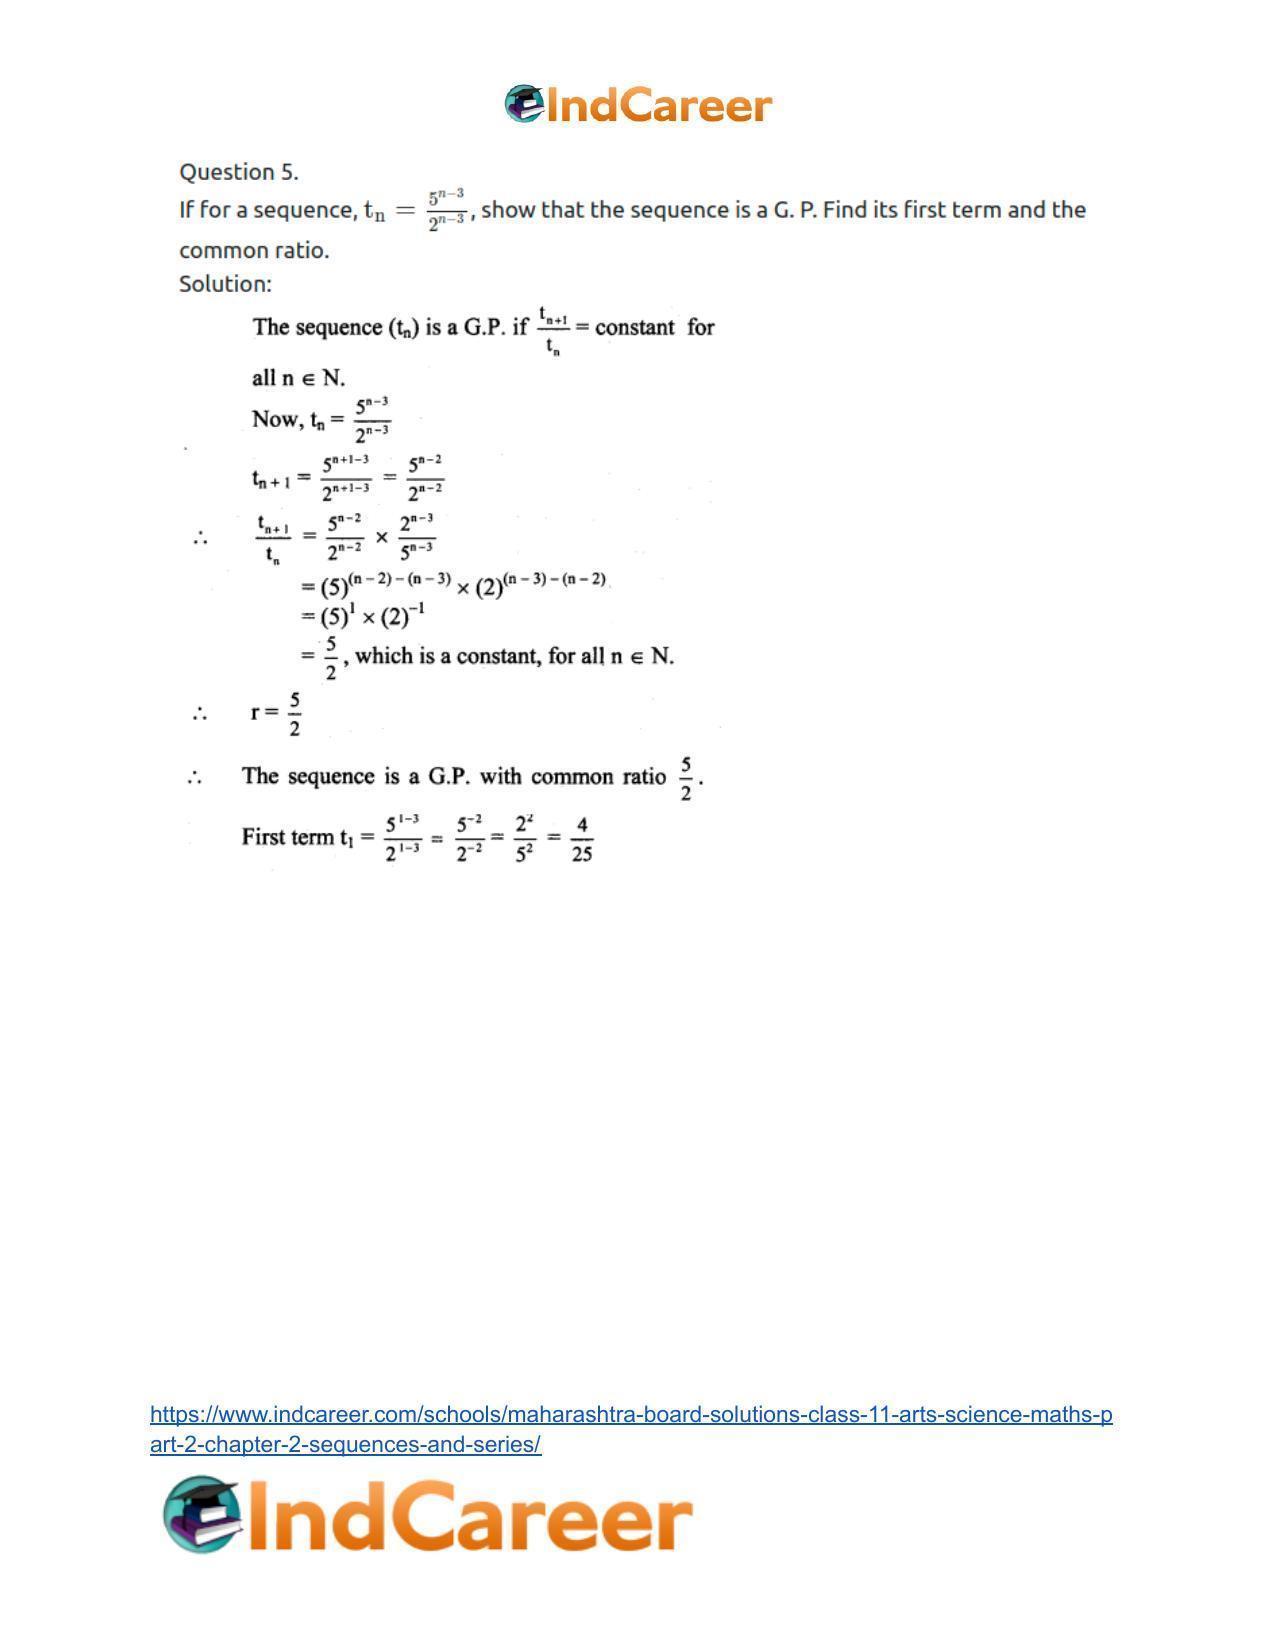 Maharashtra Board Solutions Class 11-Arts & Science Maths (Part 2): Chapter 2- Sequences and Series - Page 10